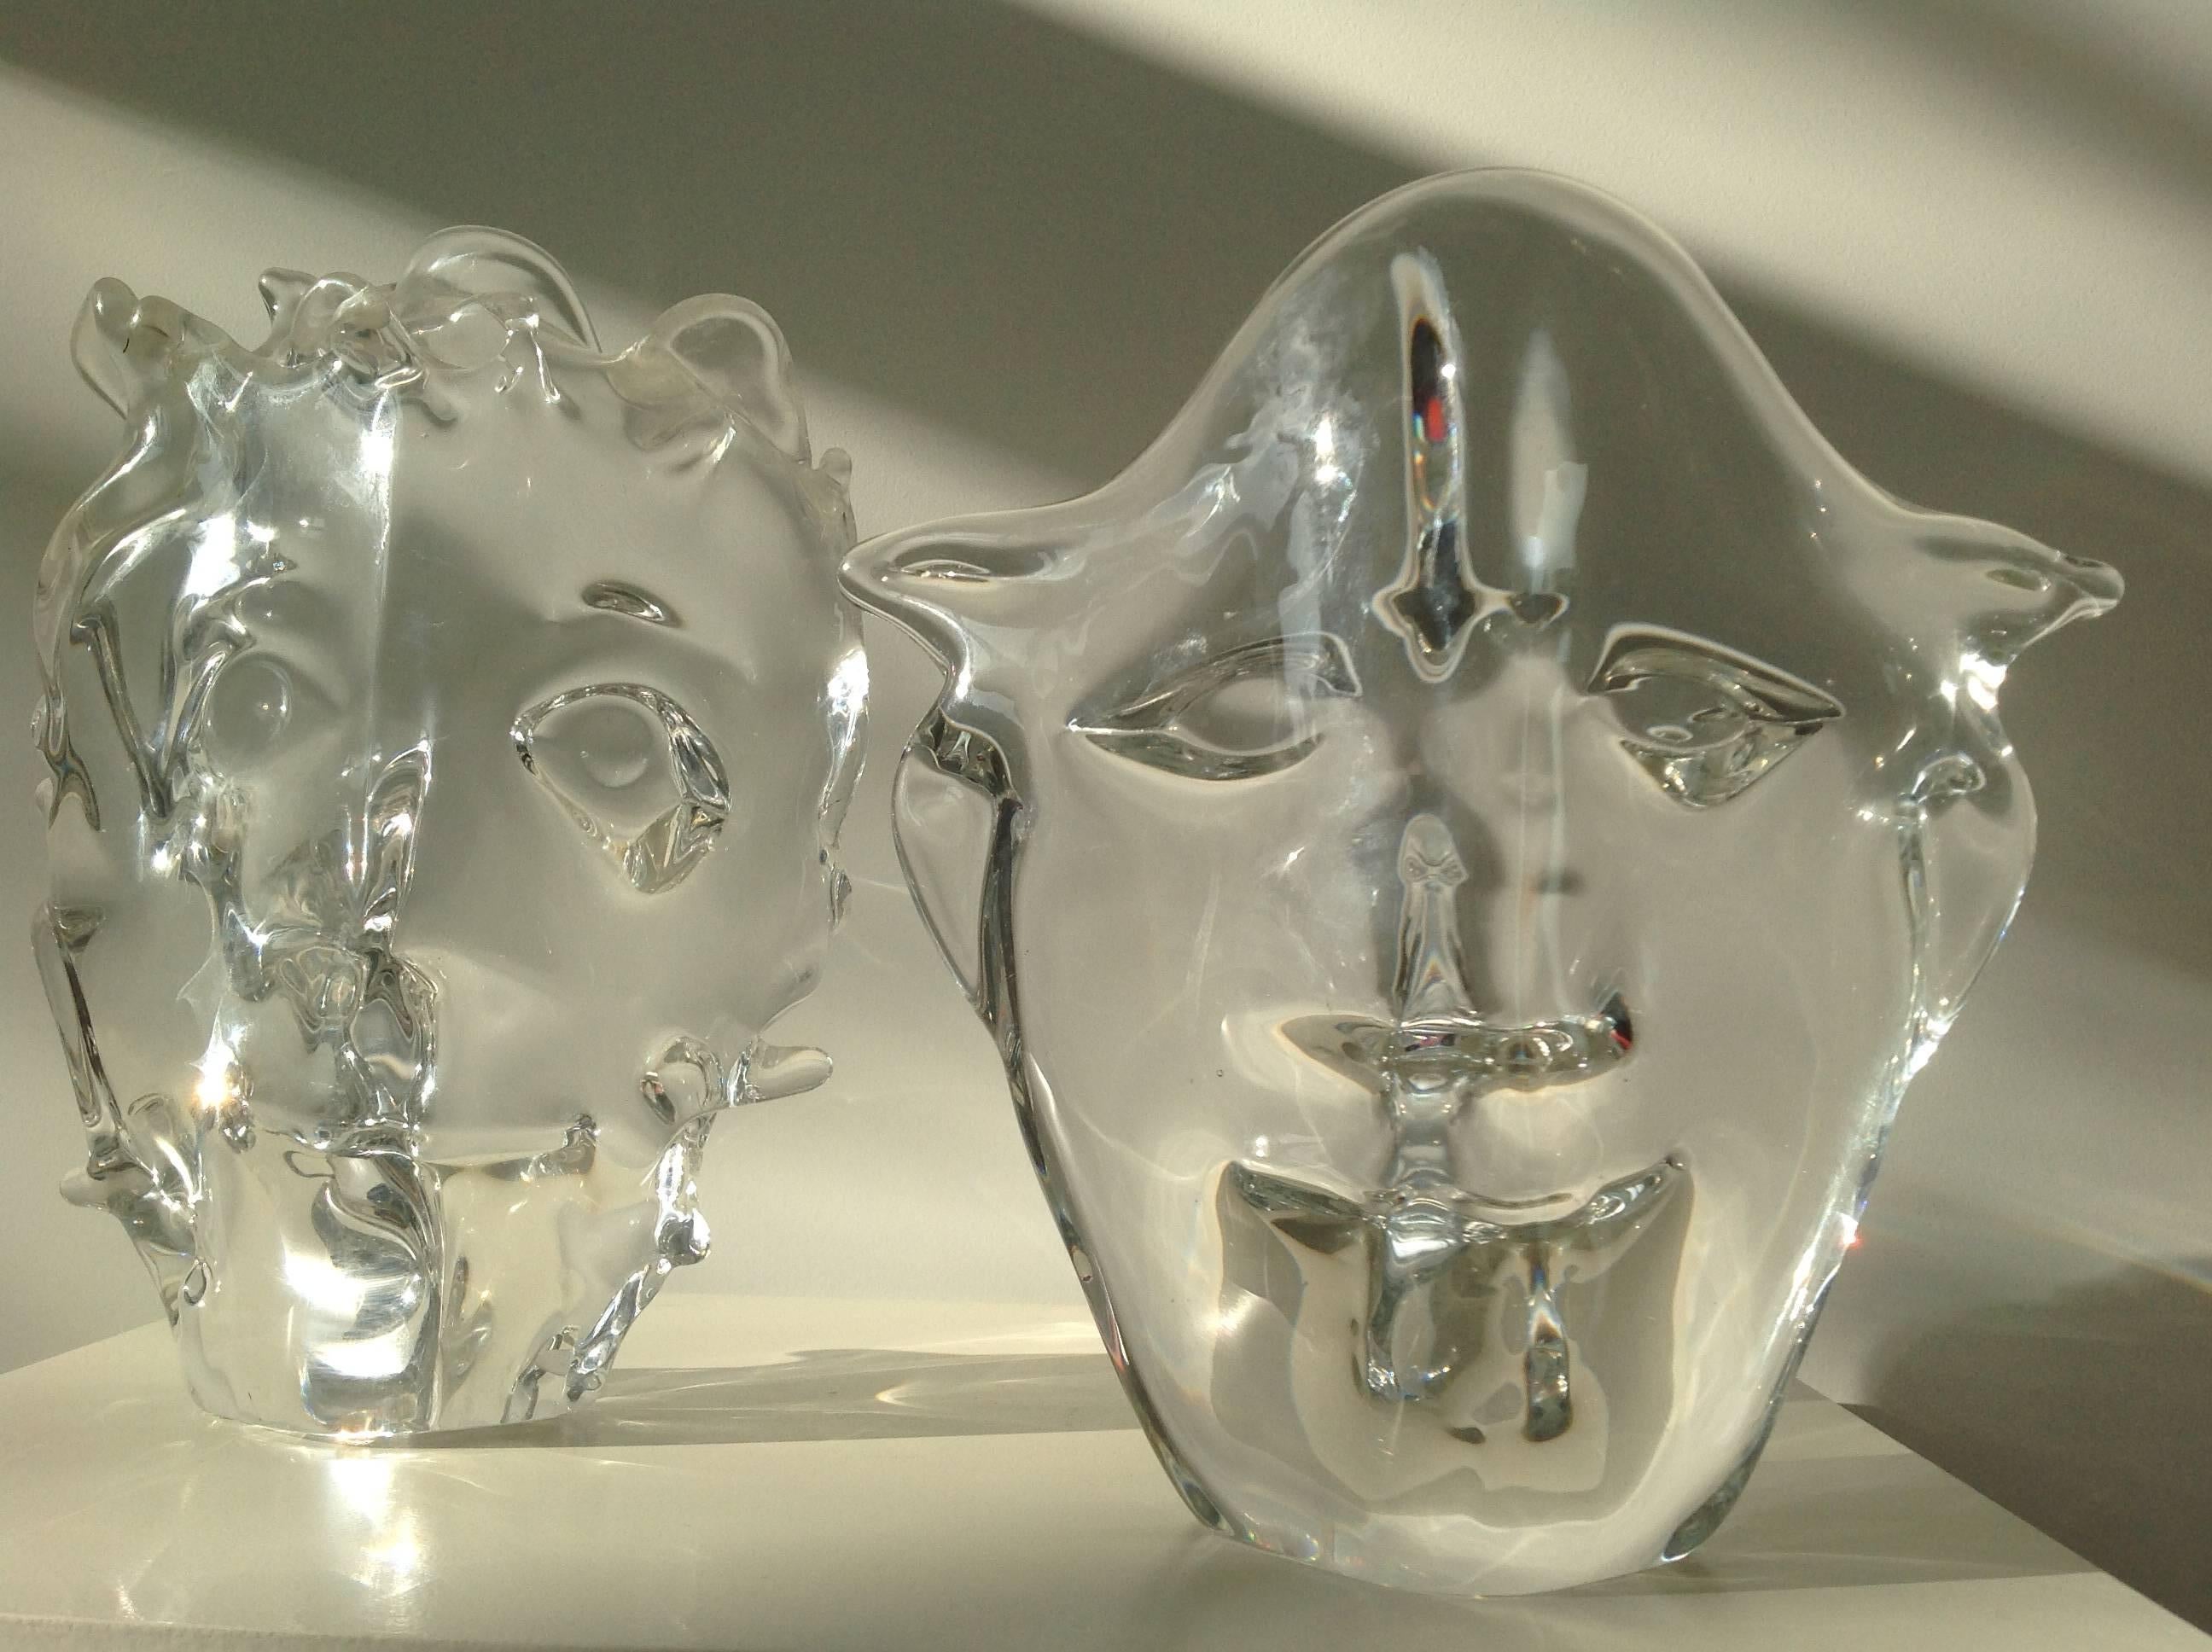 Glass masks designed by the Dutch glass designer Sybren Valkema (1916-1996) and executed by the glassmaker
Leendert van der Linden at the Glassworks Leerdam in 1960/61. Each piece is one of a kind.